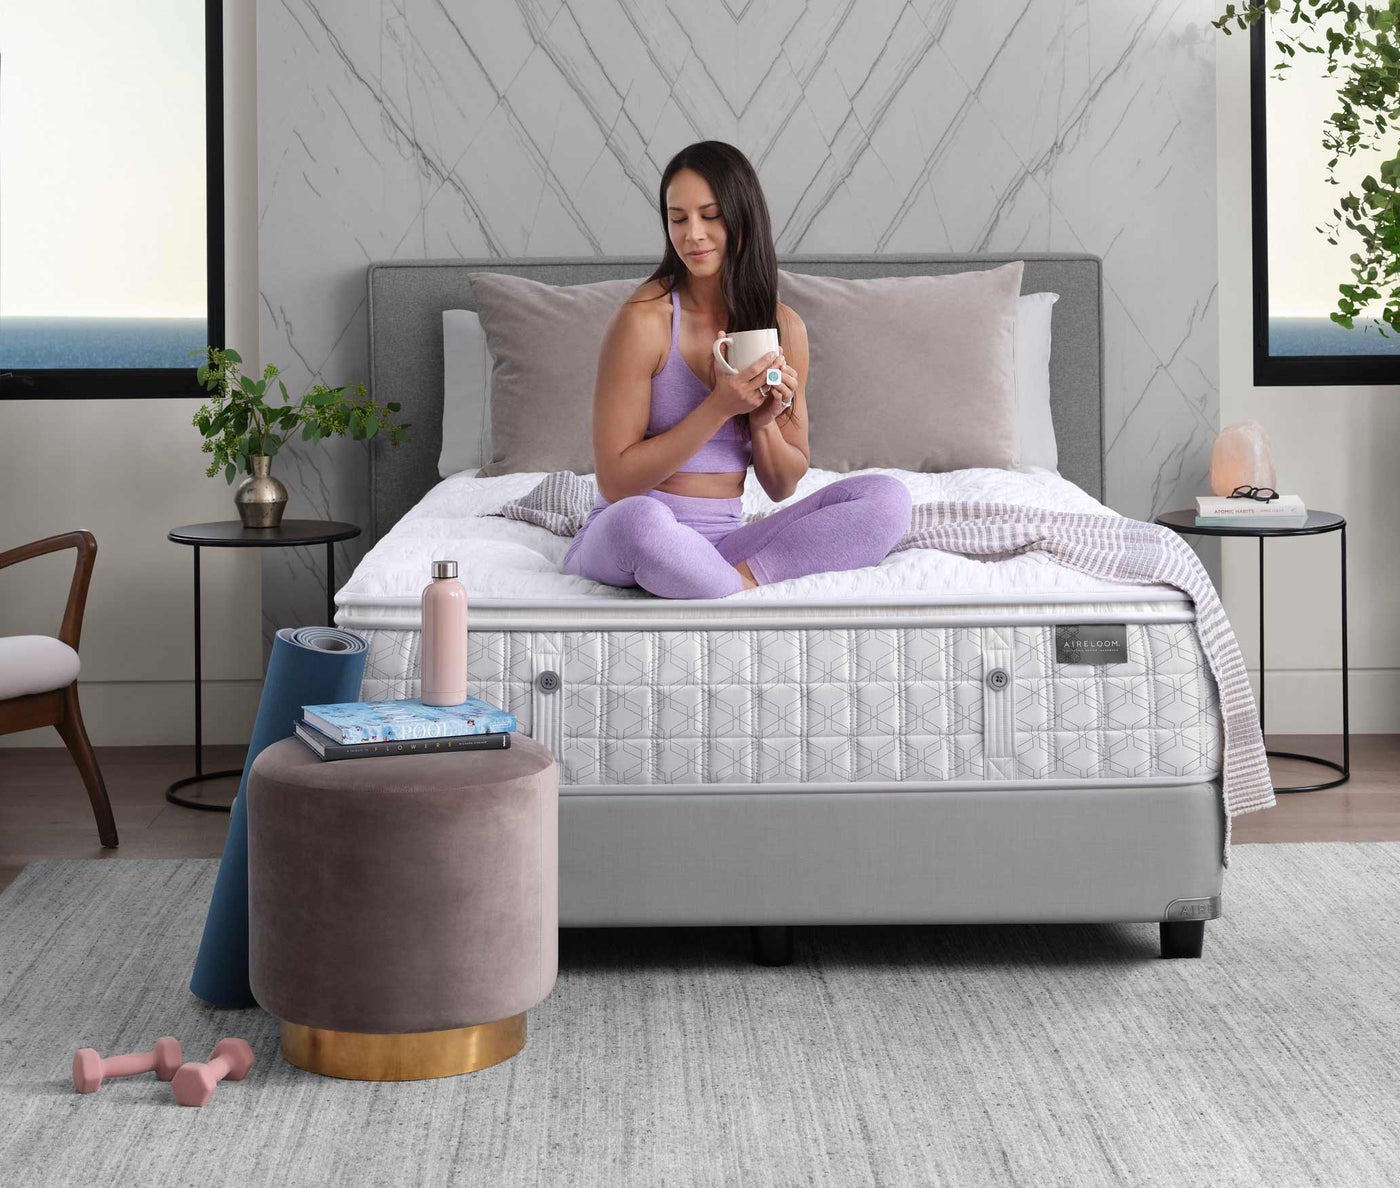 A woman wearing a light purple yoga outfit sits on top of a bare Aireloom mattress, there is a gray wall behind the bed and two windows on either side